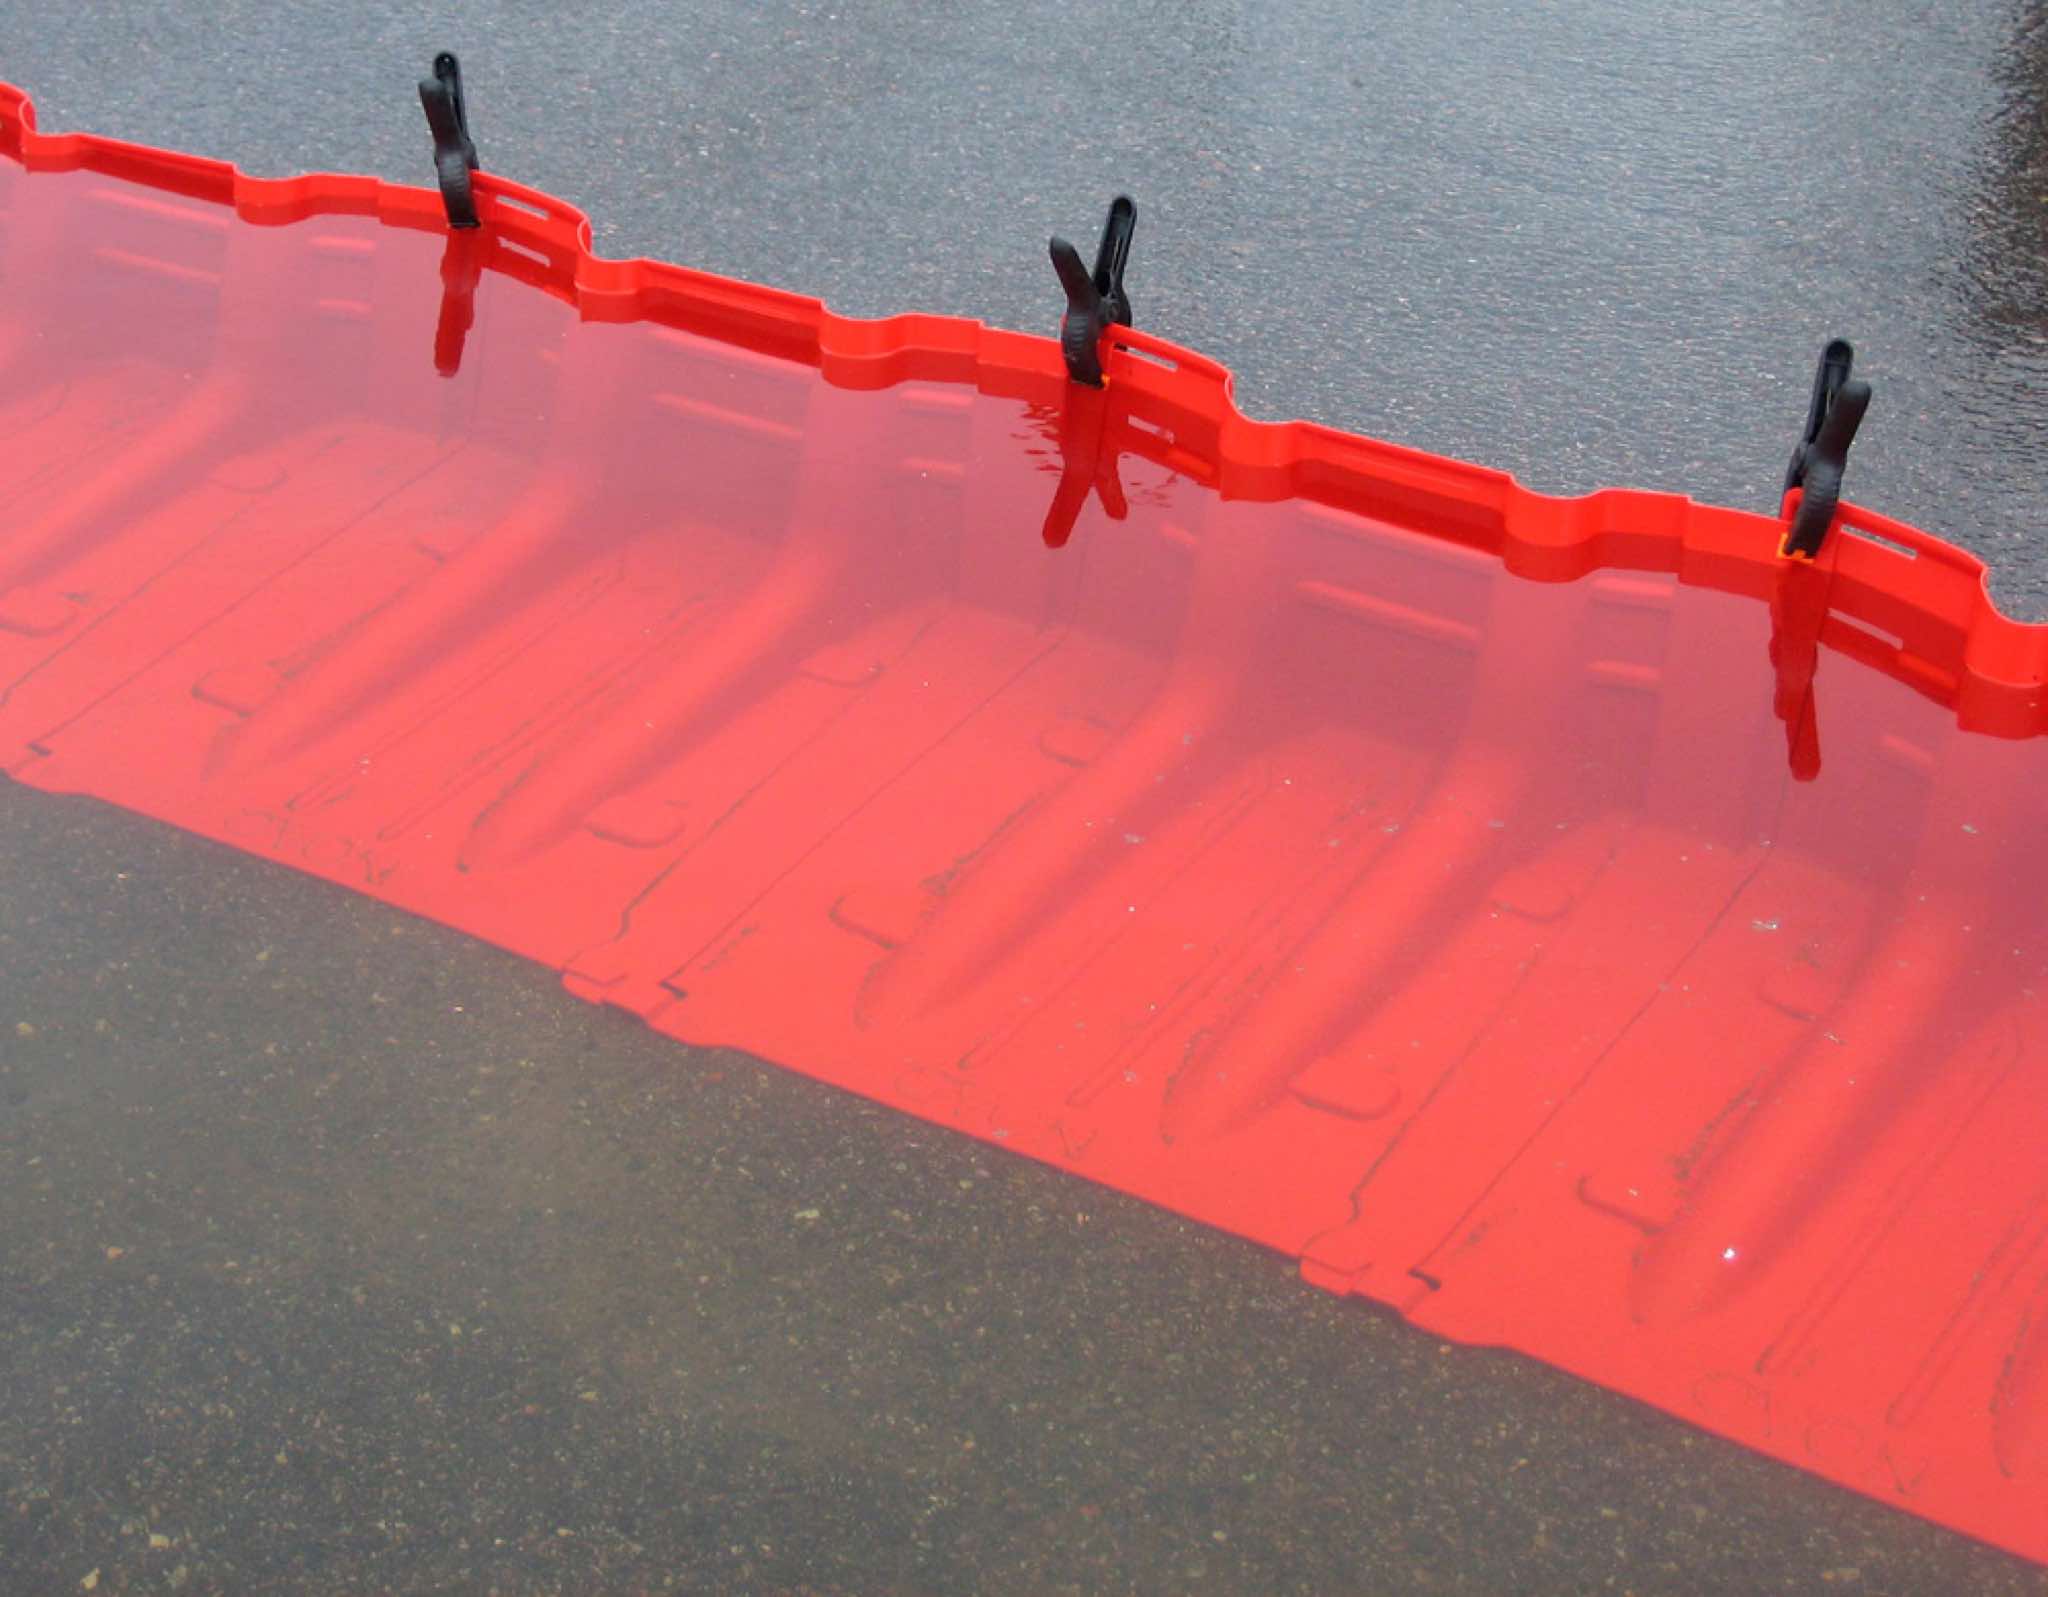 Freestanding temporary flood barrier designed for fast response to flood threats in an urban environment, on hard and even surfaces like tarmac, paving and concrete.